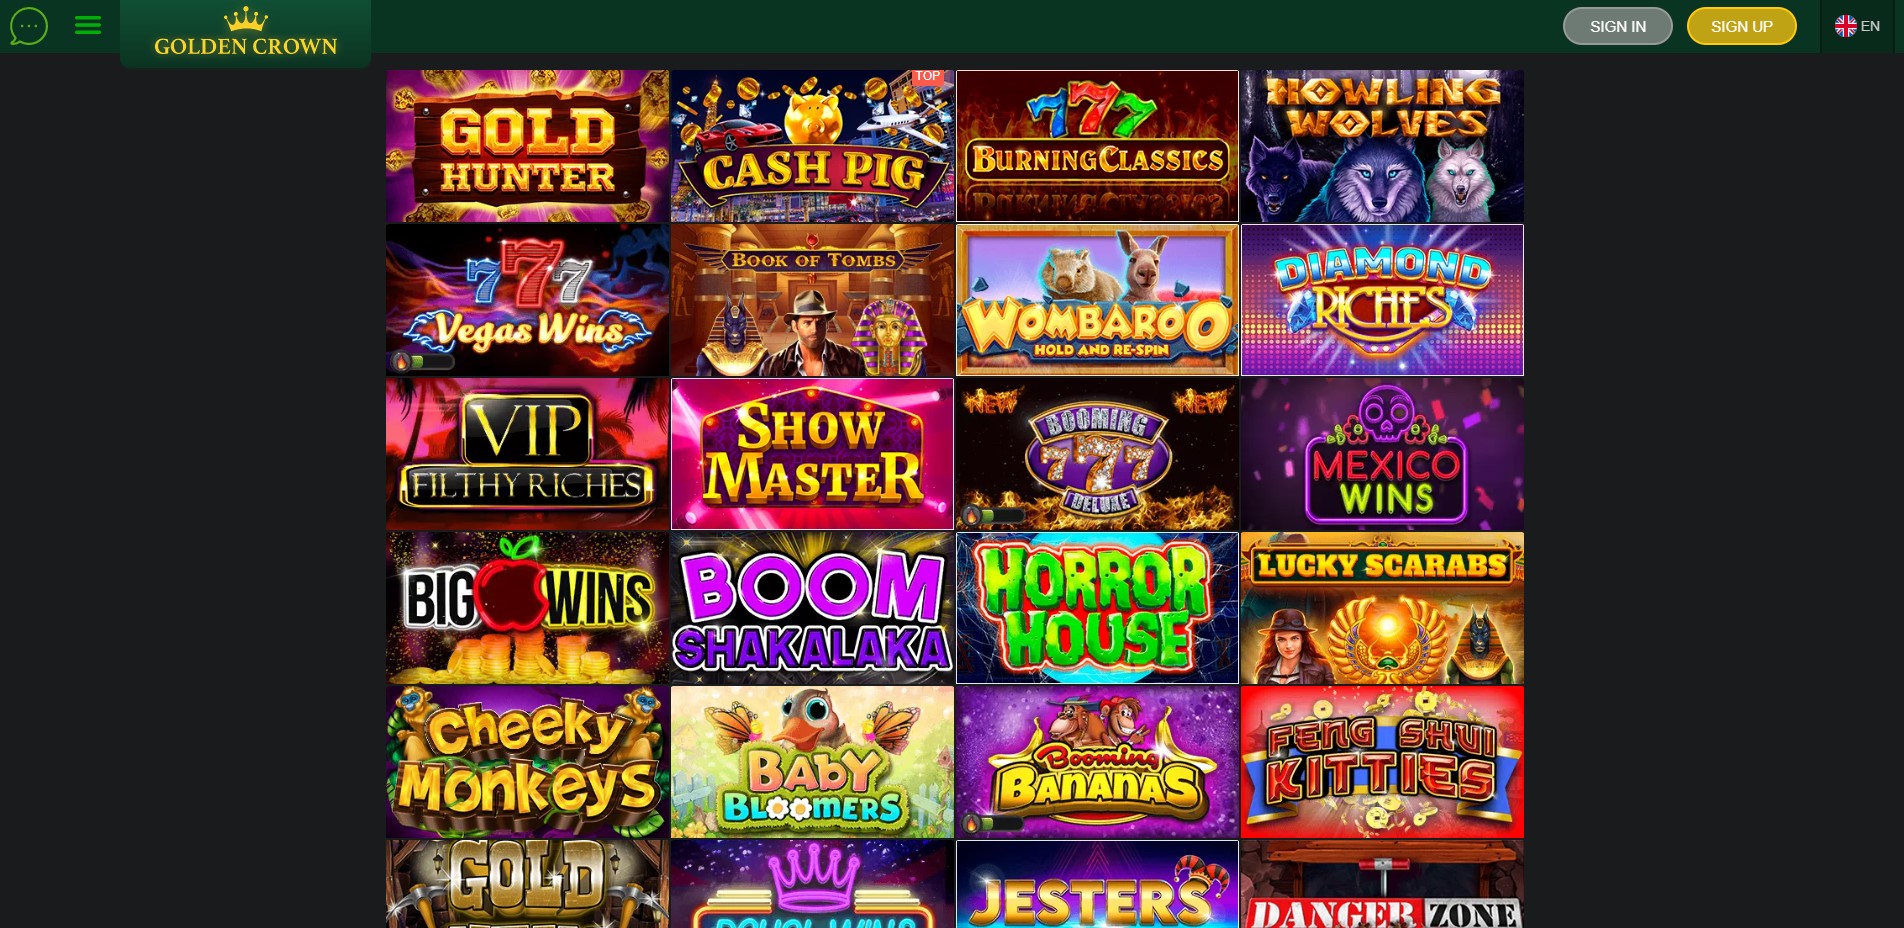 Slots by Booming Games at Golden Crown Casino